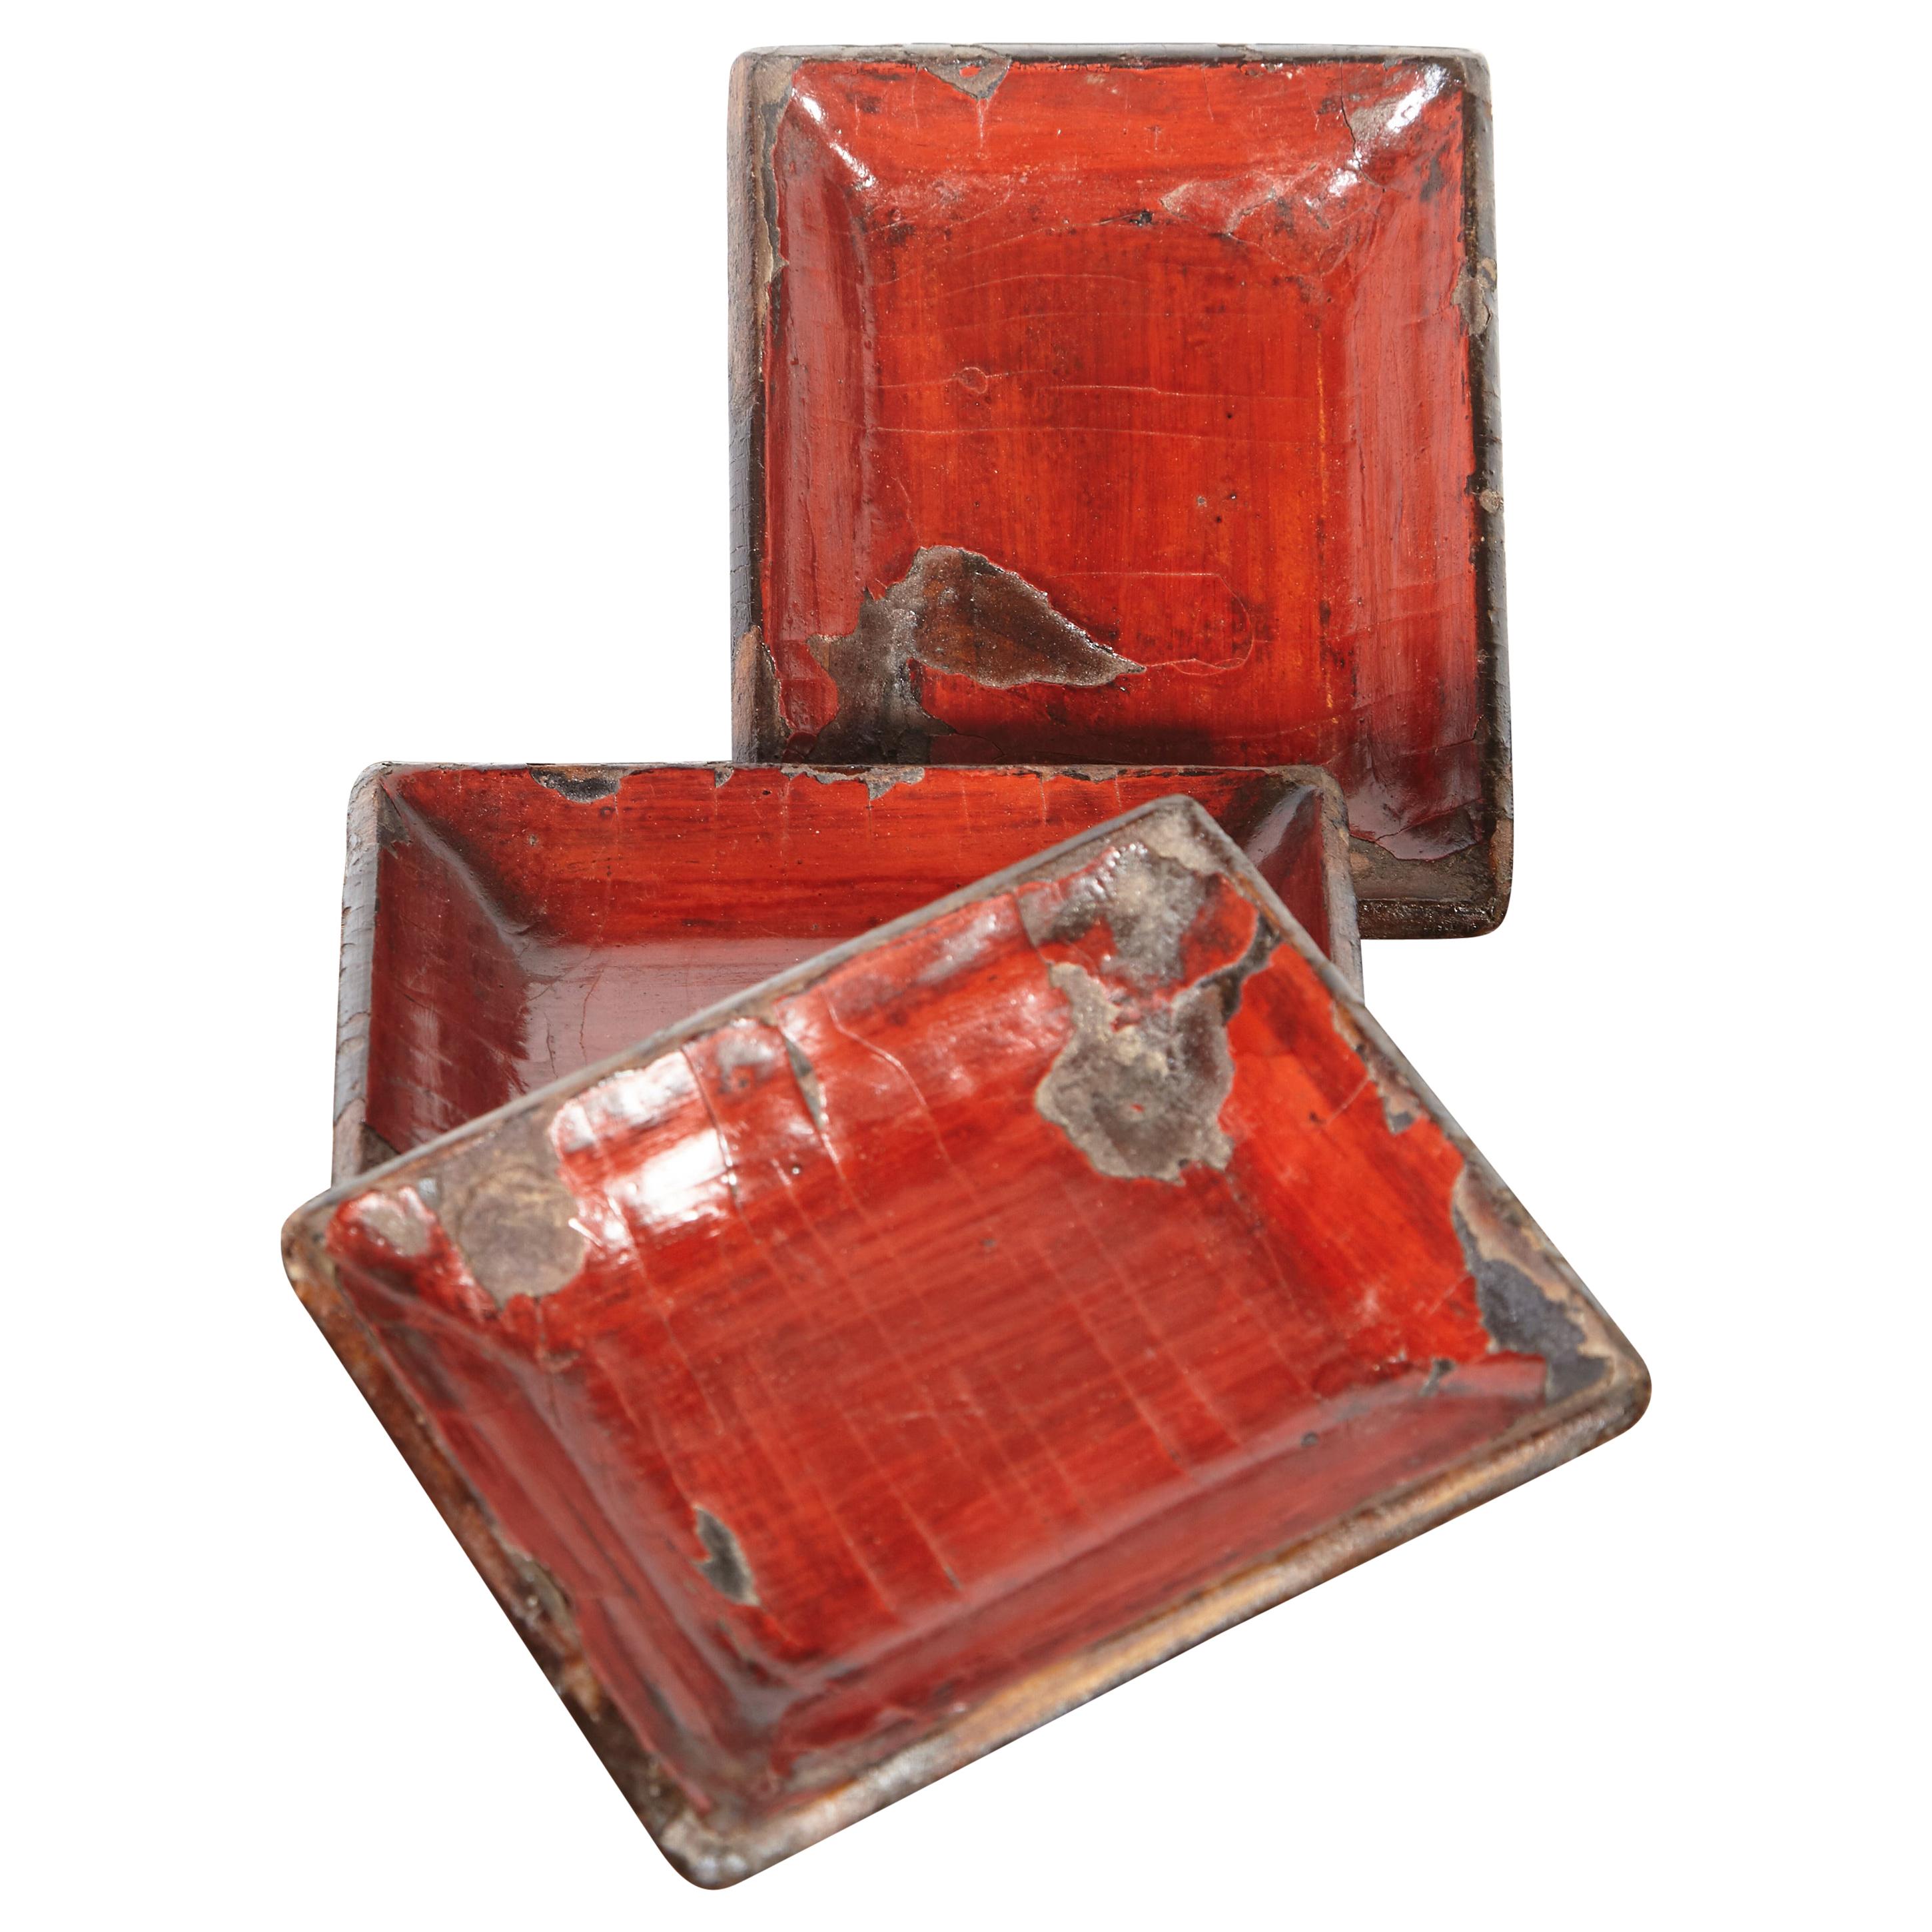 Set of 19th Century Small Chinese Lacquer Trays